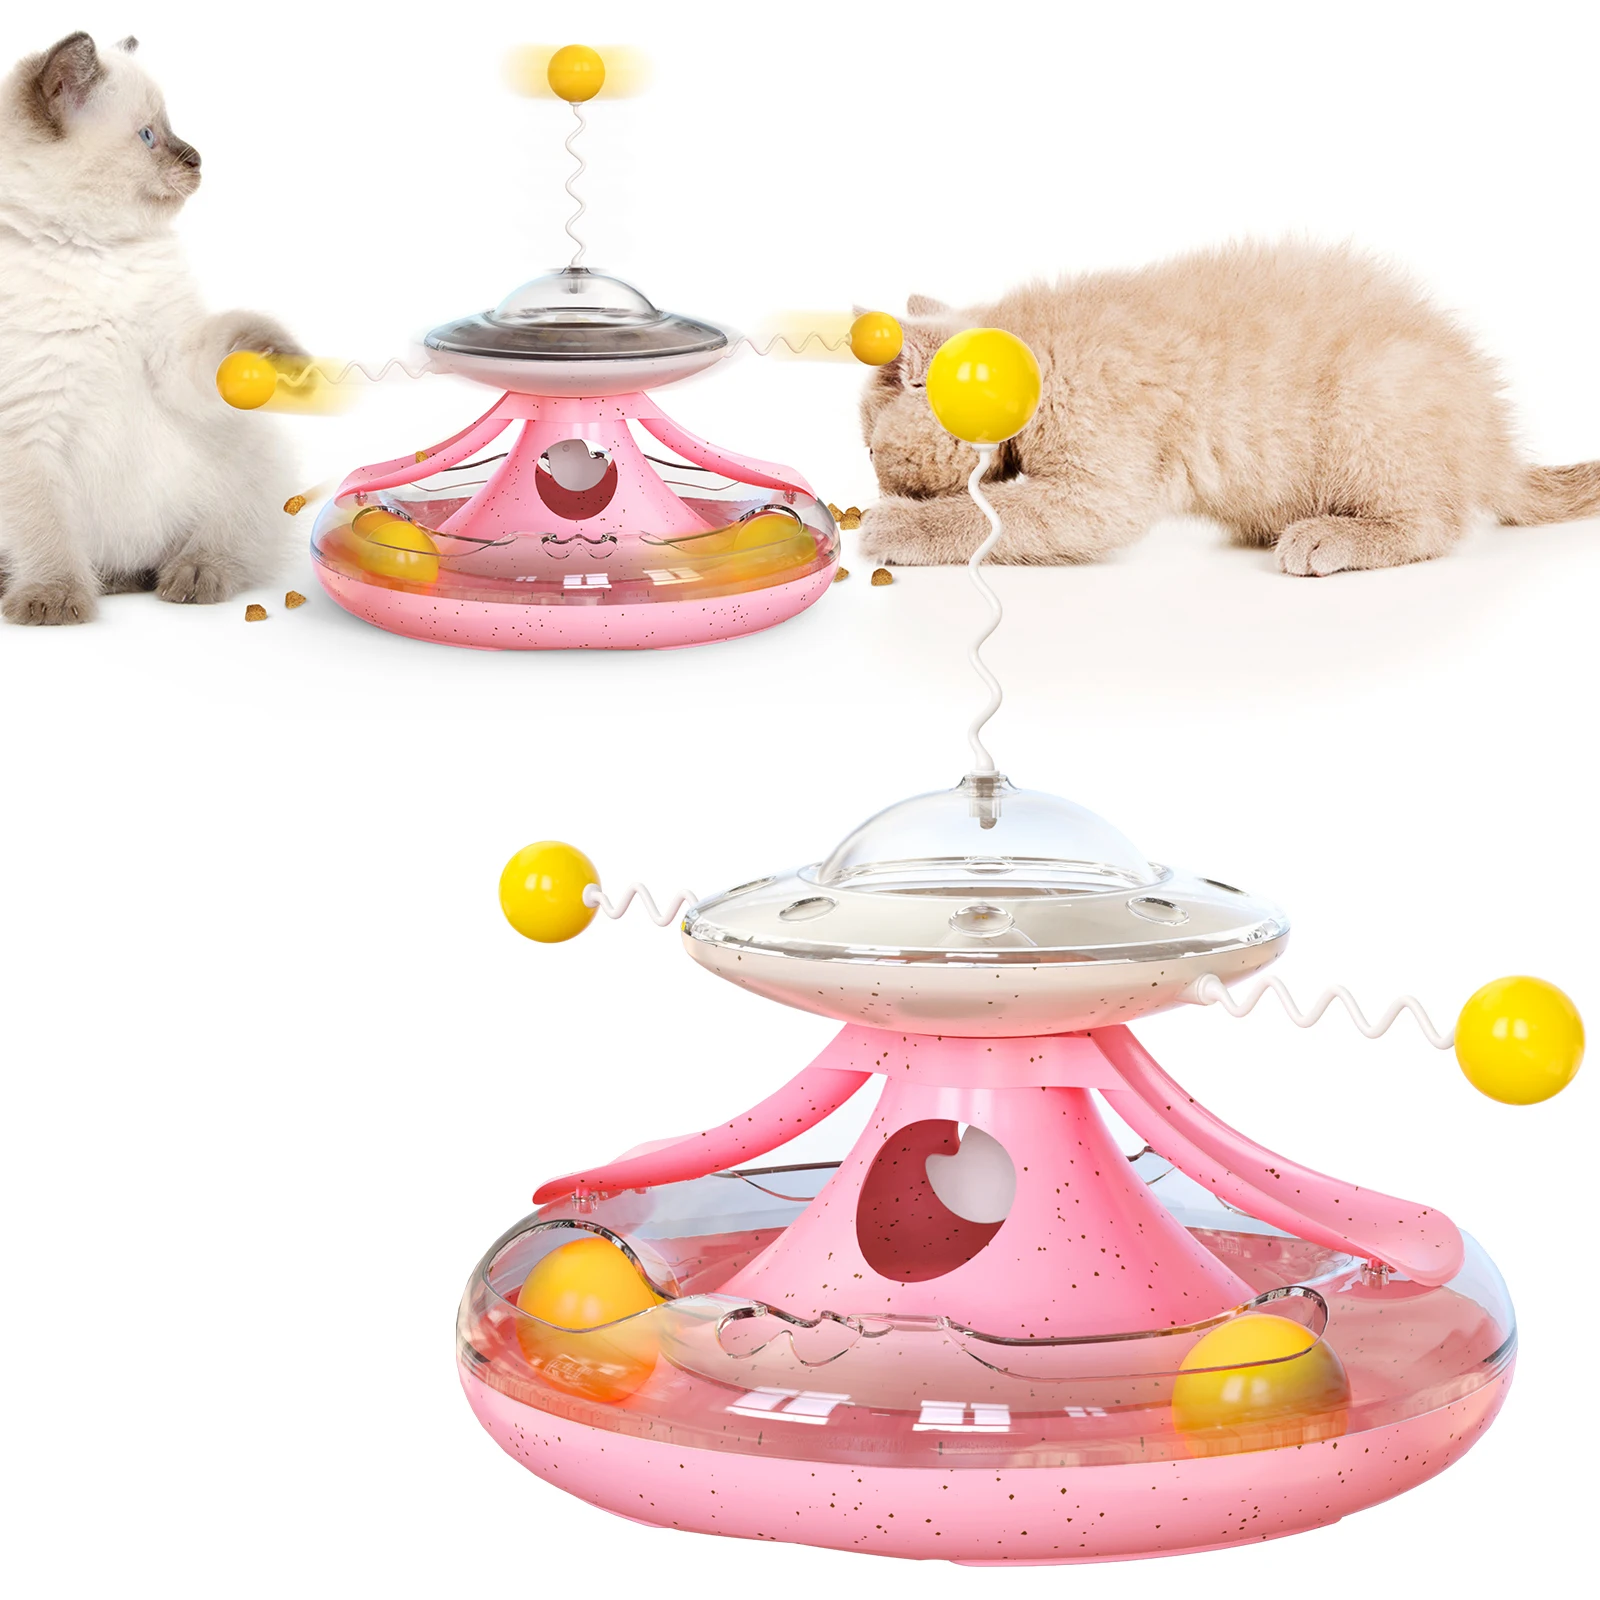 

Manufacturers Hot Multifunctional turntable cat toys Leakage food toys Happy Turntable Cat playing interactive pet toys for cats